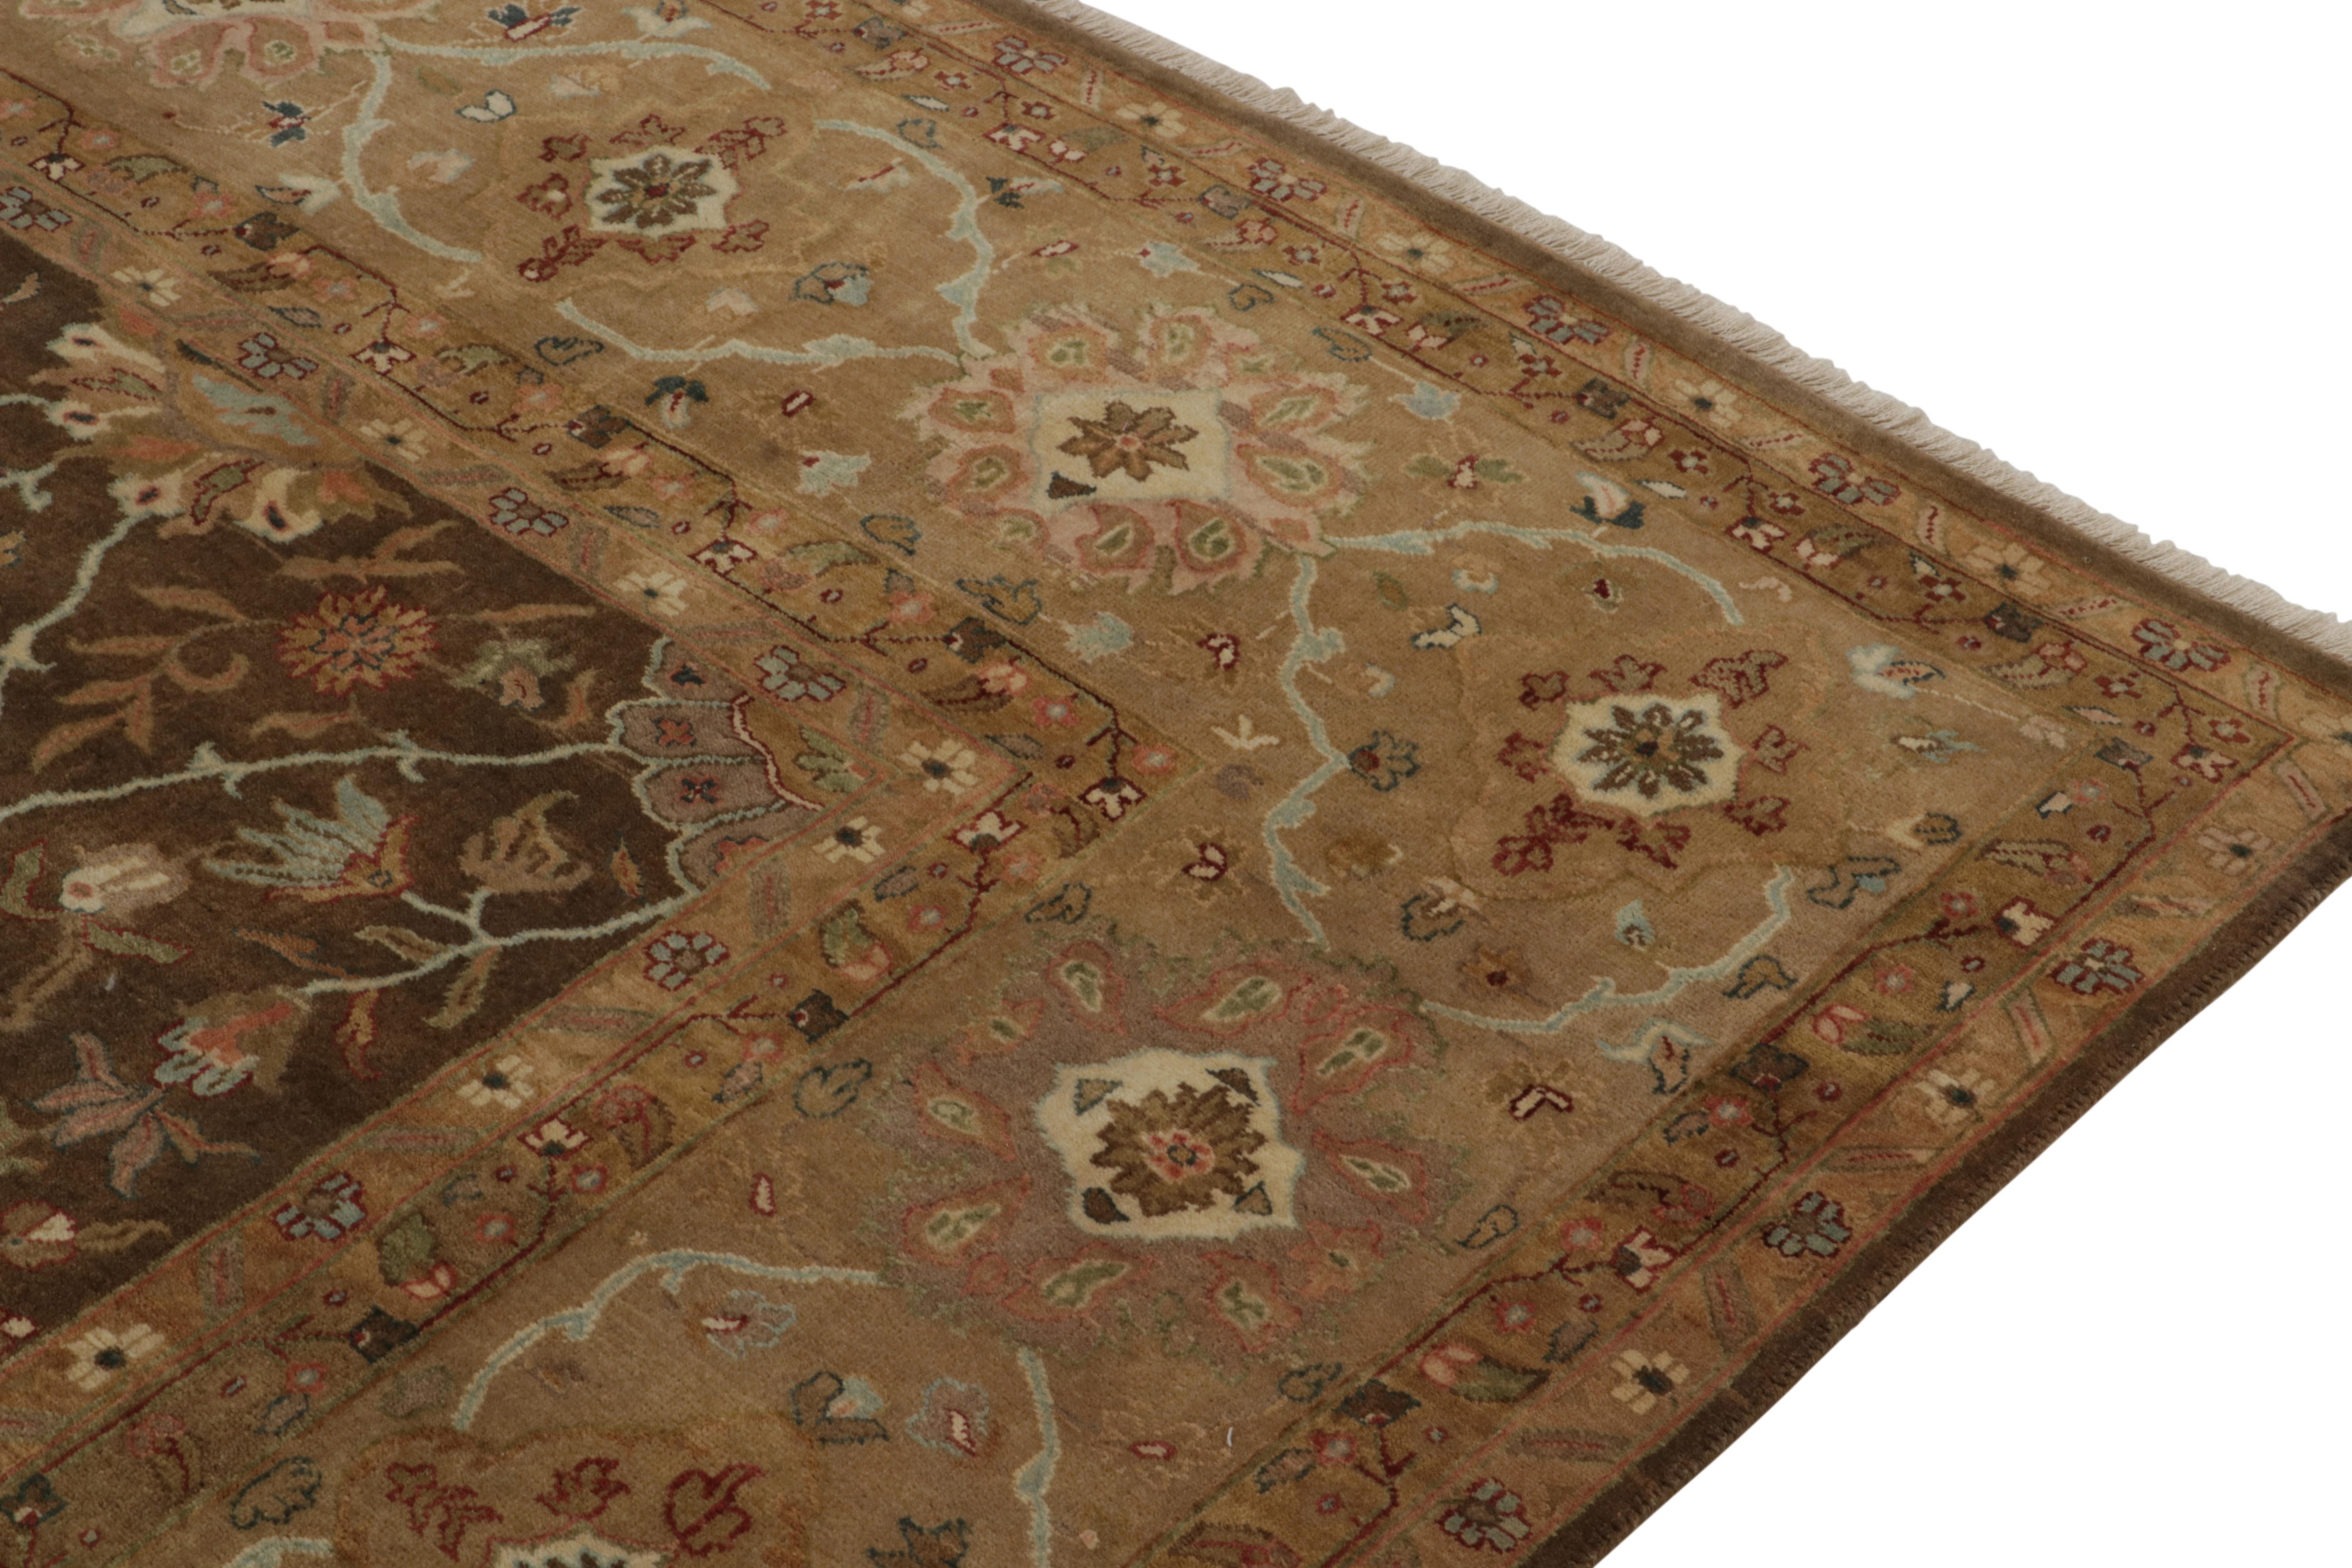 Indian Rug & Kilim’s Tabriz Style Rug in Beige-Brown, Red and Blue Floral Patterns For Sale